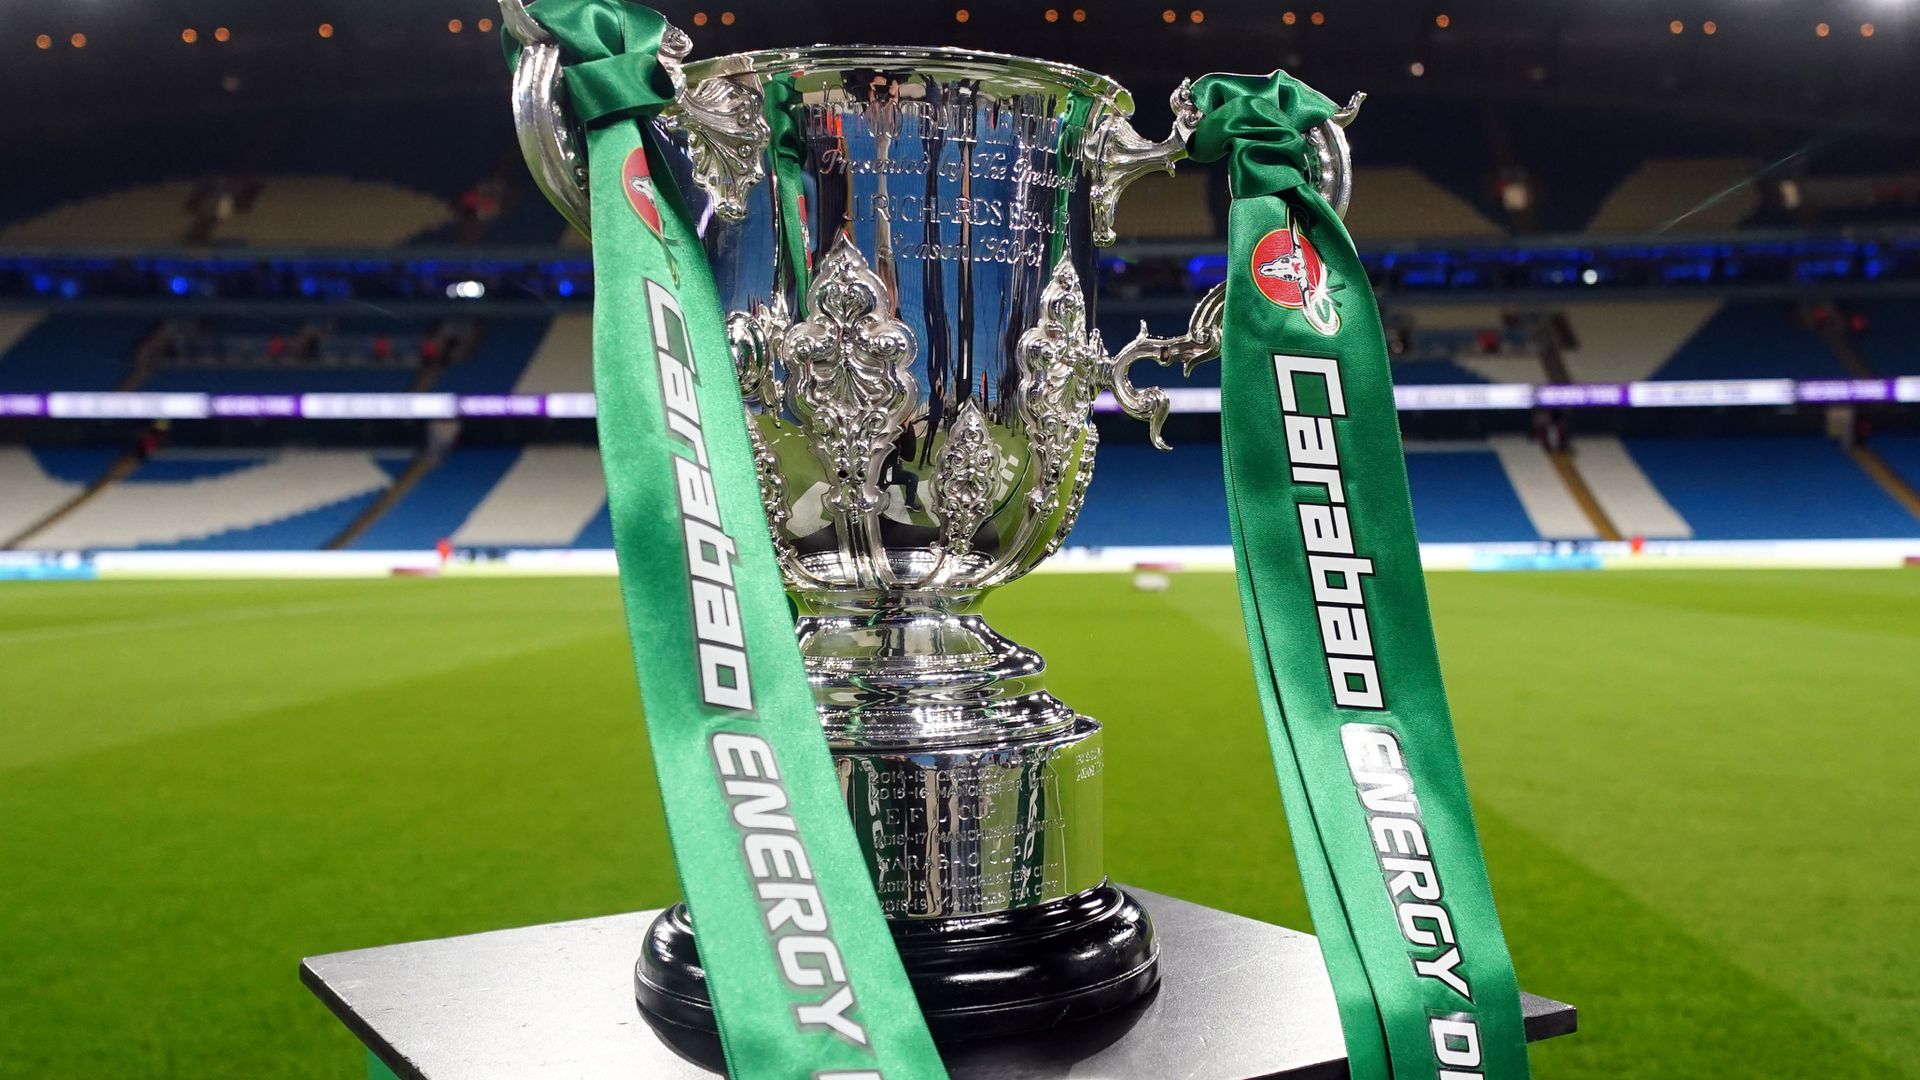 Man City to host Liverpool in Carabao Cup fourth round | Man Utd face Burnley